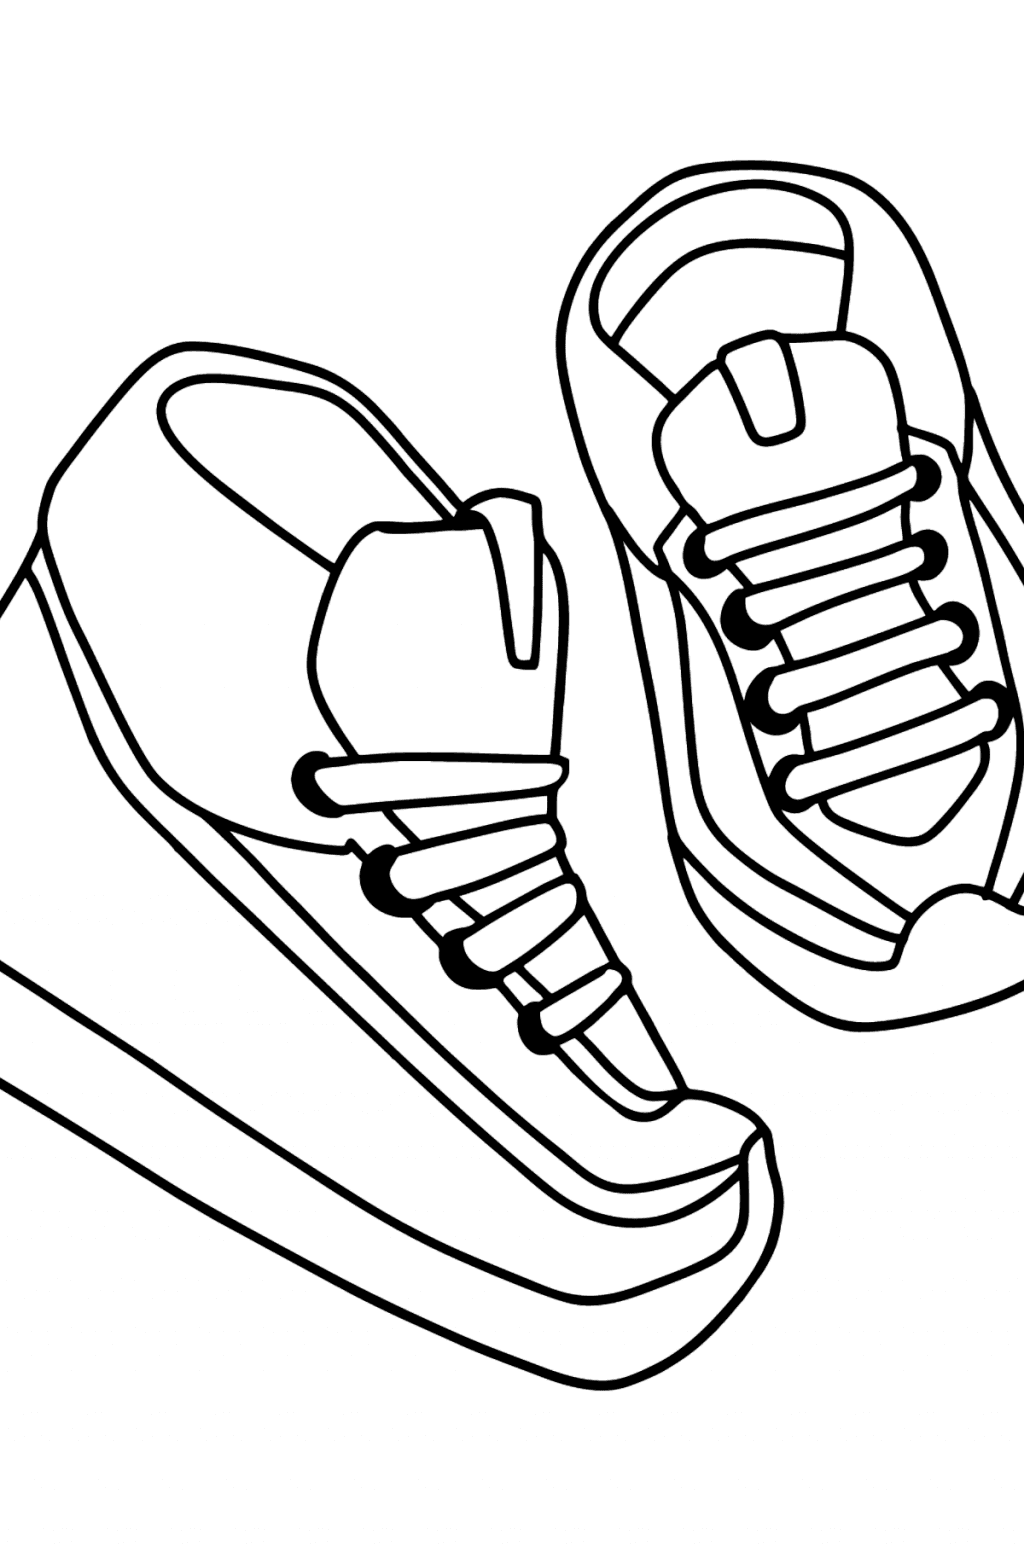 Sneakers coloring page ♥ for kids Online or Printable for Free!